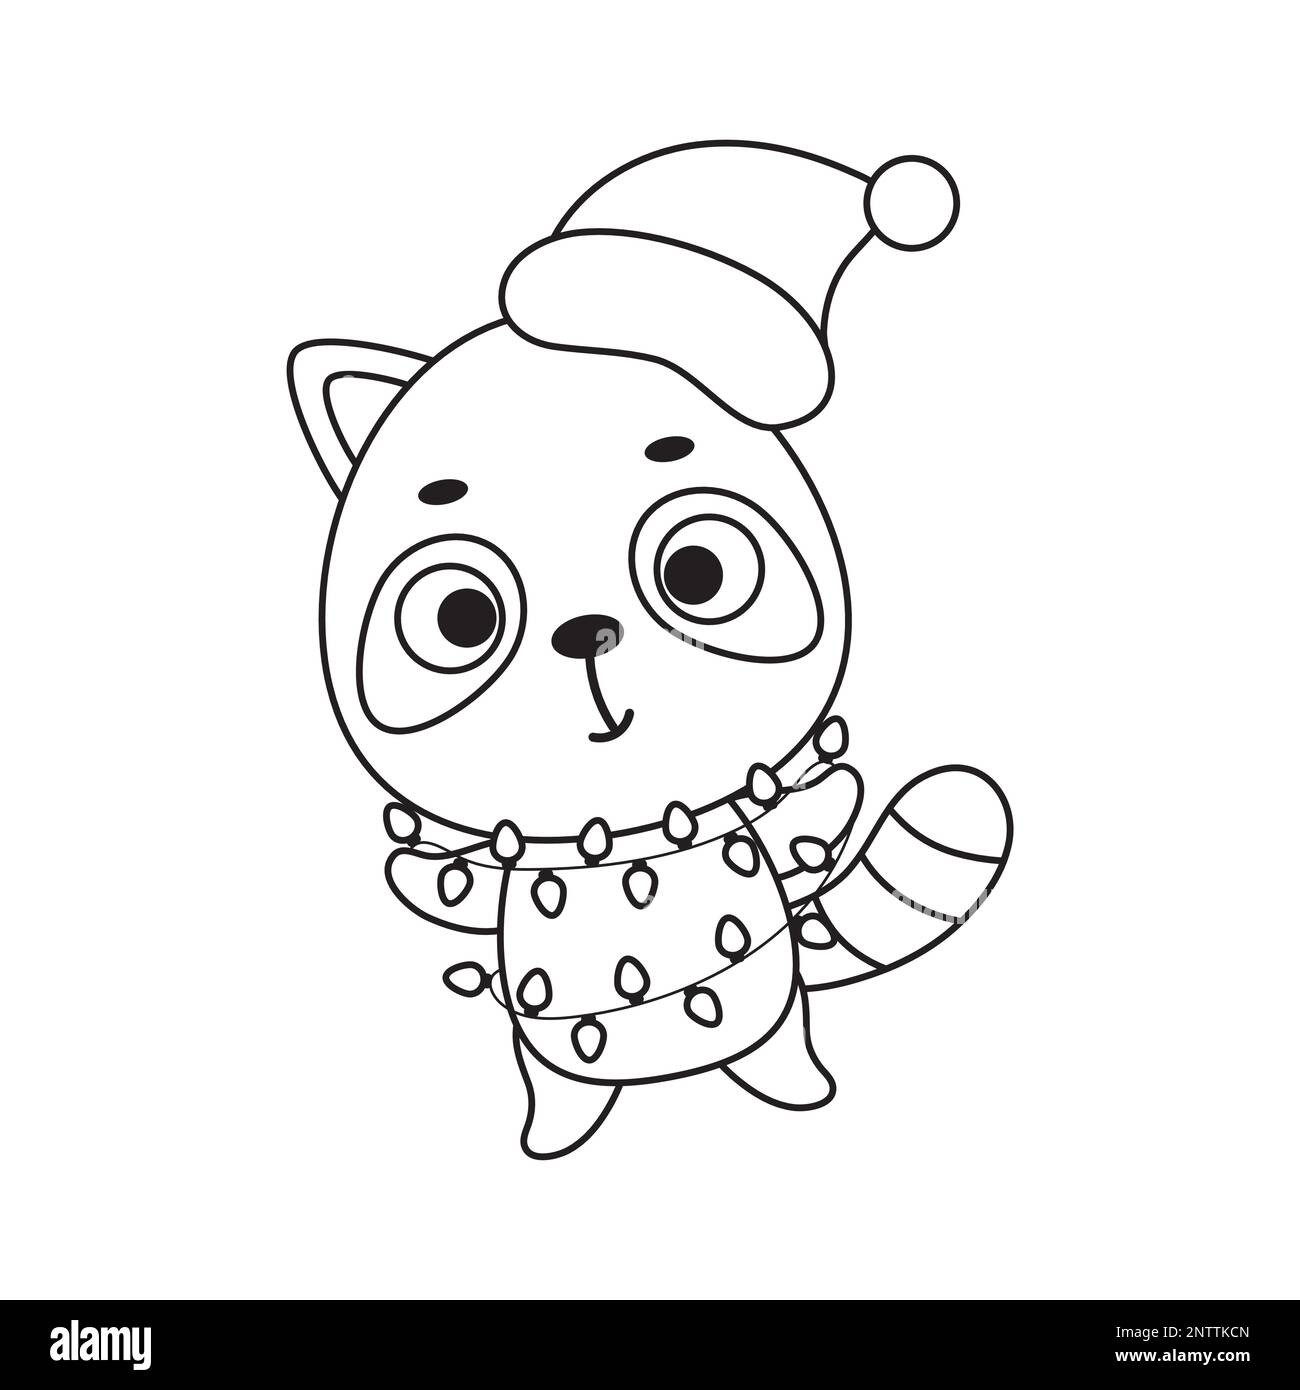 Coloring page cute christmas raccoon with garland coloring book for kids educational activity for preschool years kids and toddlers with cute animal stock vector image art